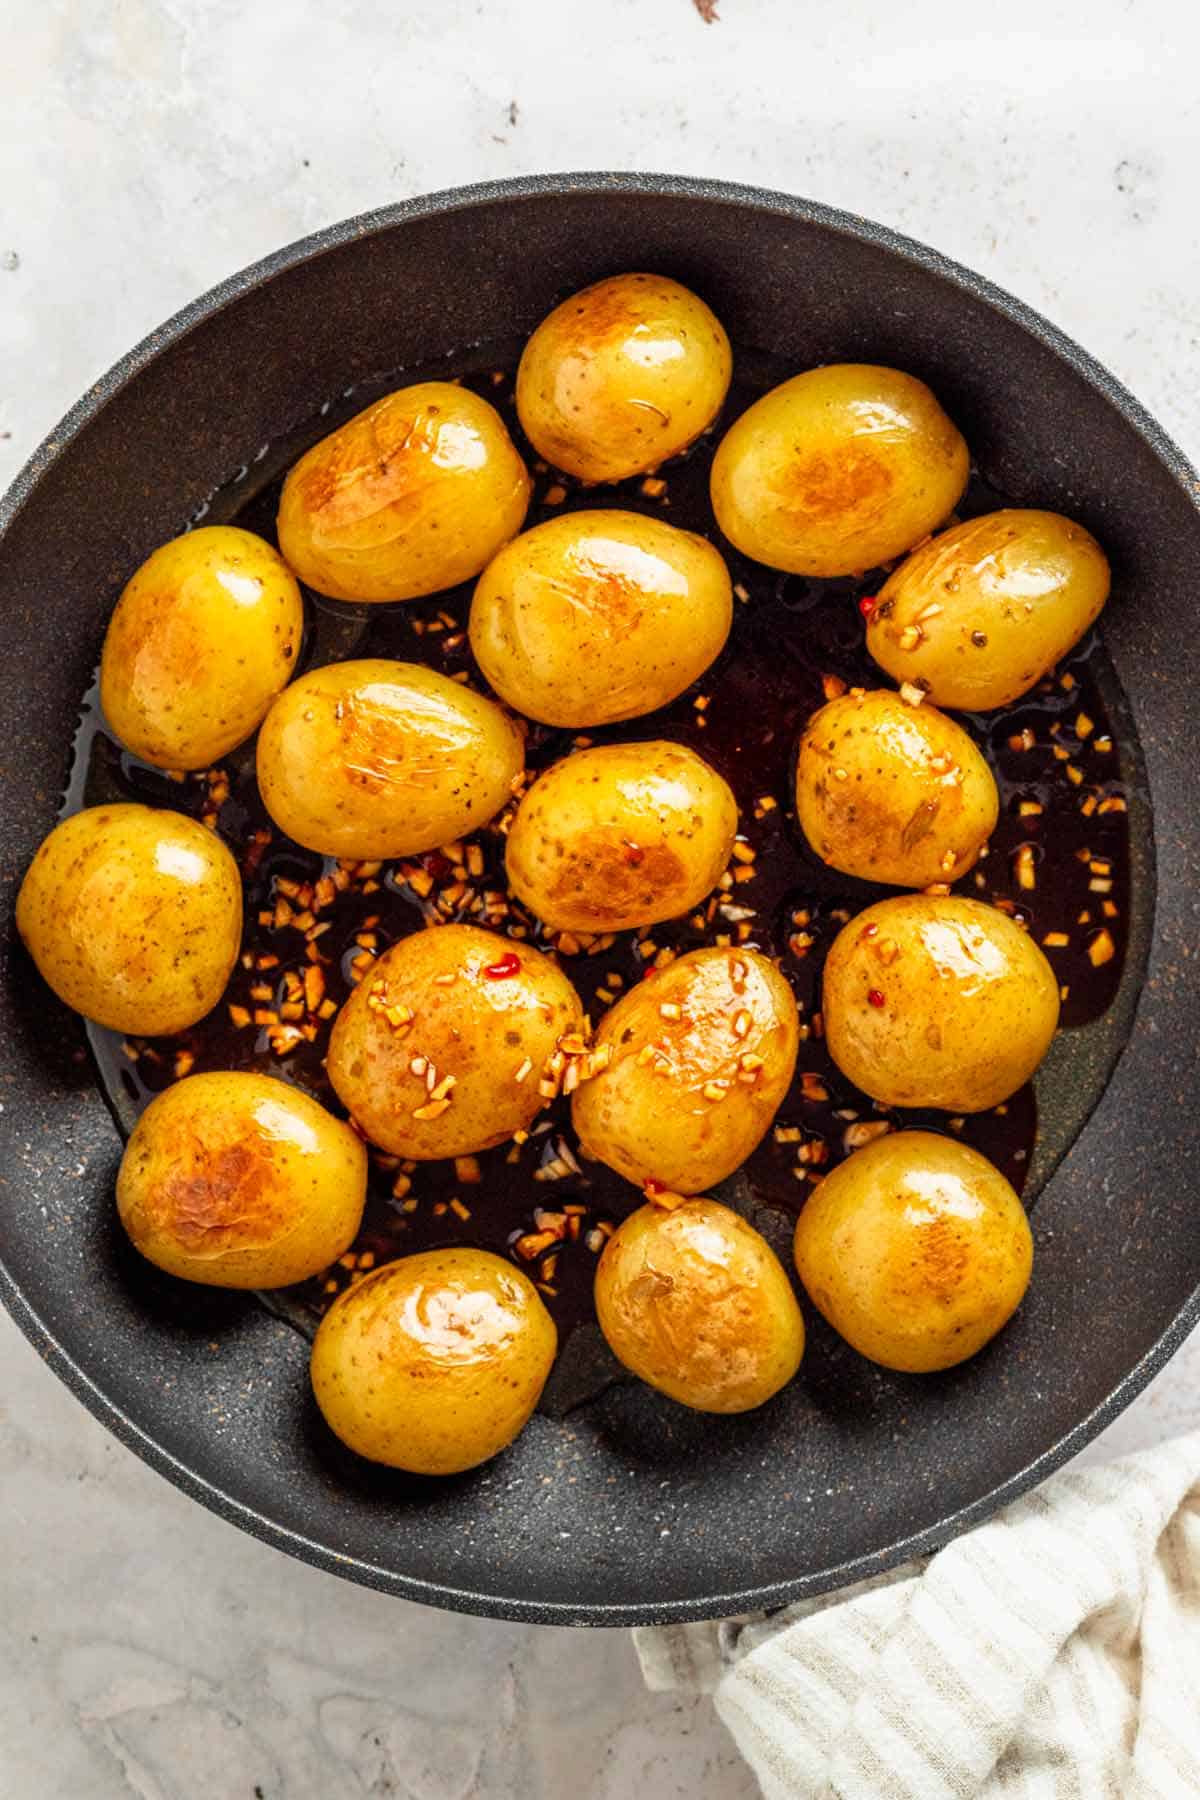 a skillet full of skin on baby potatoes/